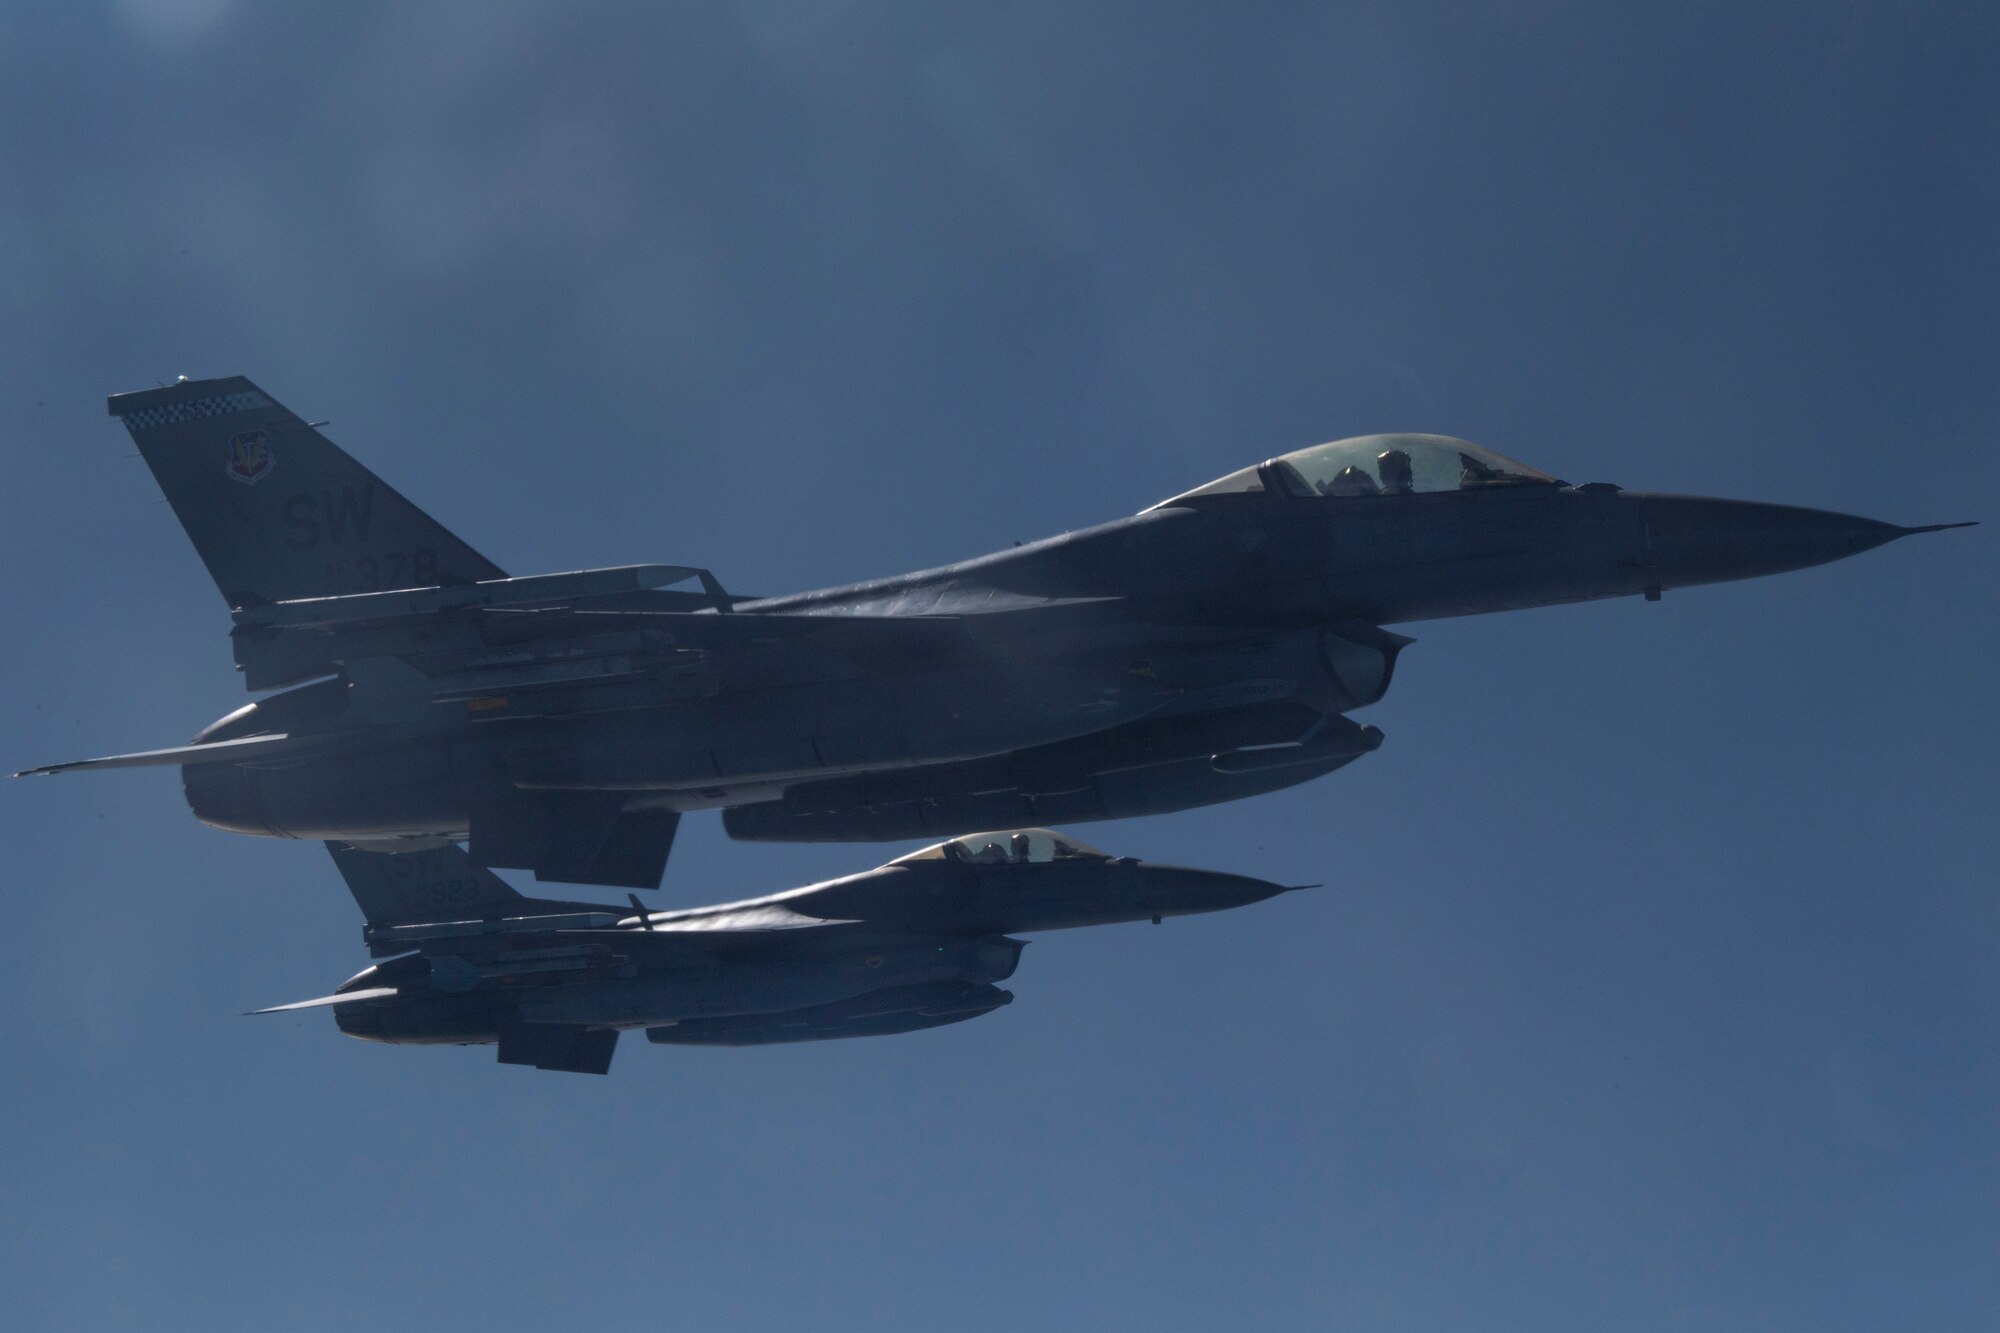 F-16 Fighting Falcon aircraft assigned to Shaw Air Force Base (AFB), South Carolina, fly in formation to provide defensive air support to KC-135 Stratotanker aircraft assigned to MacDill AFB, Florida, during a training scenario, Dec. 2, 2020.